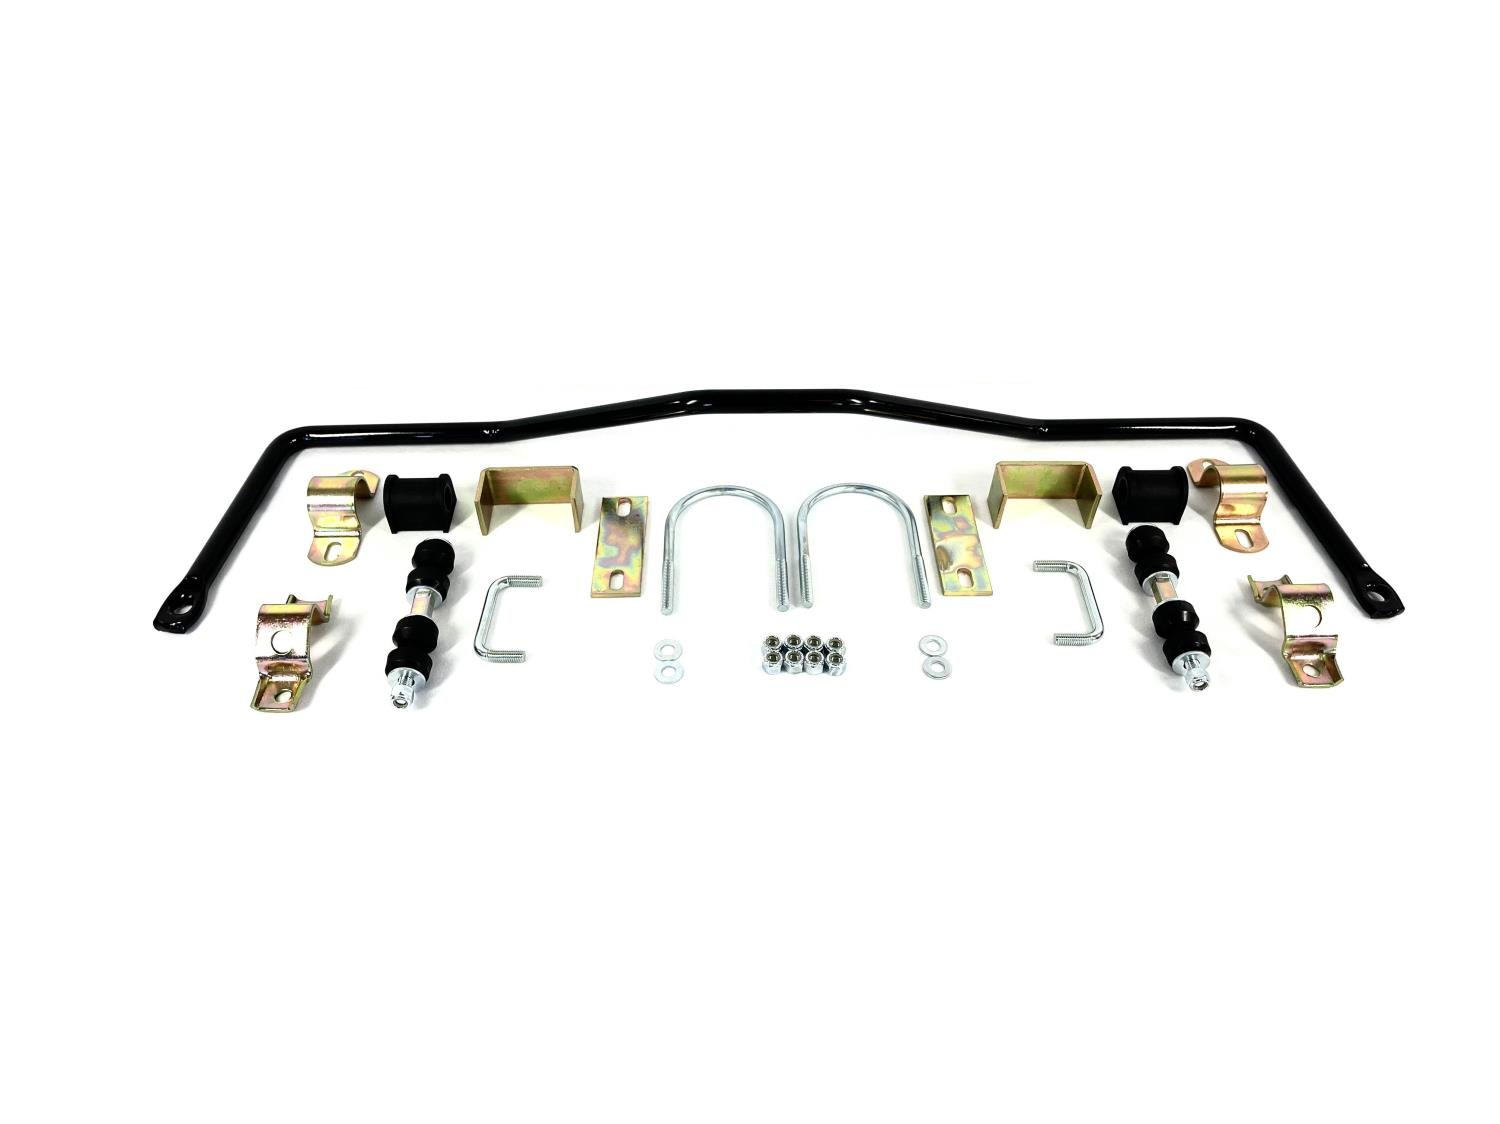 Includes New Hardware. May Reuse OE Hardware Designed for & Compatible with 1975-79 Buick Skylark 7/8 ADDCO Sway Bar Kit K1-671-0U-61 Rear Sway Bar 671-0.875 